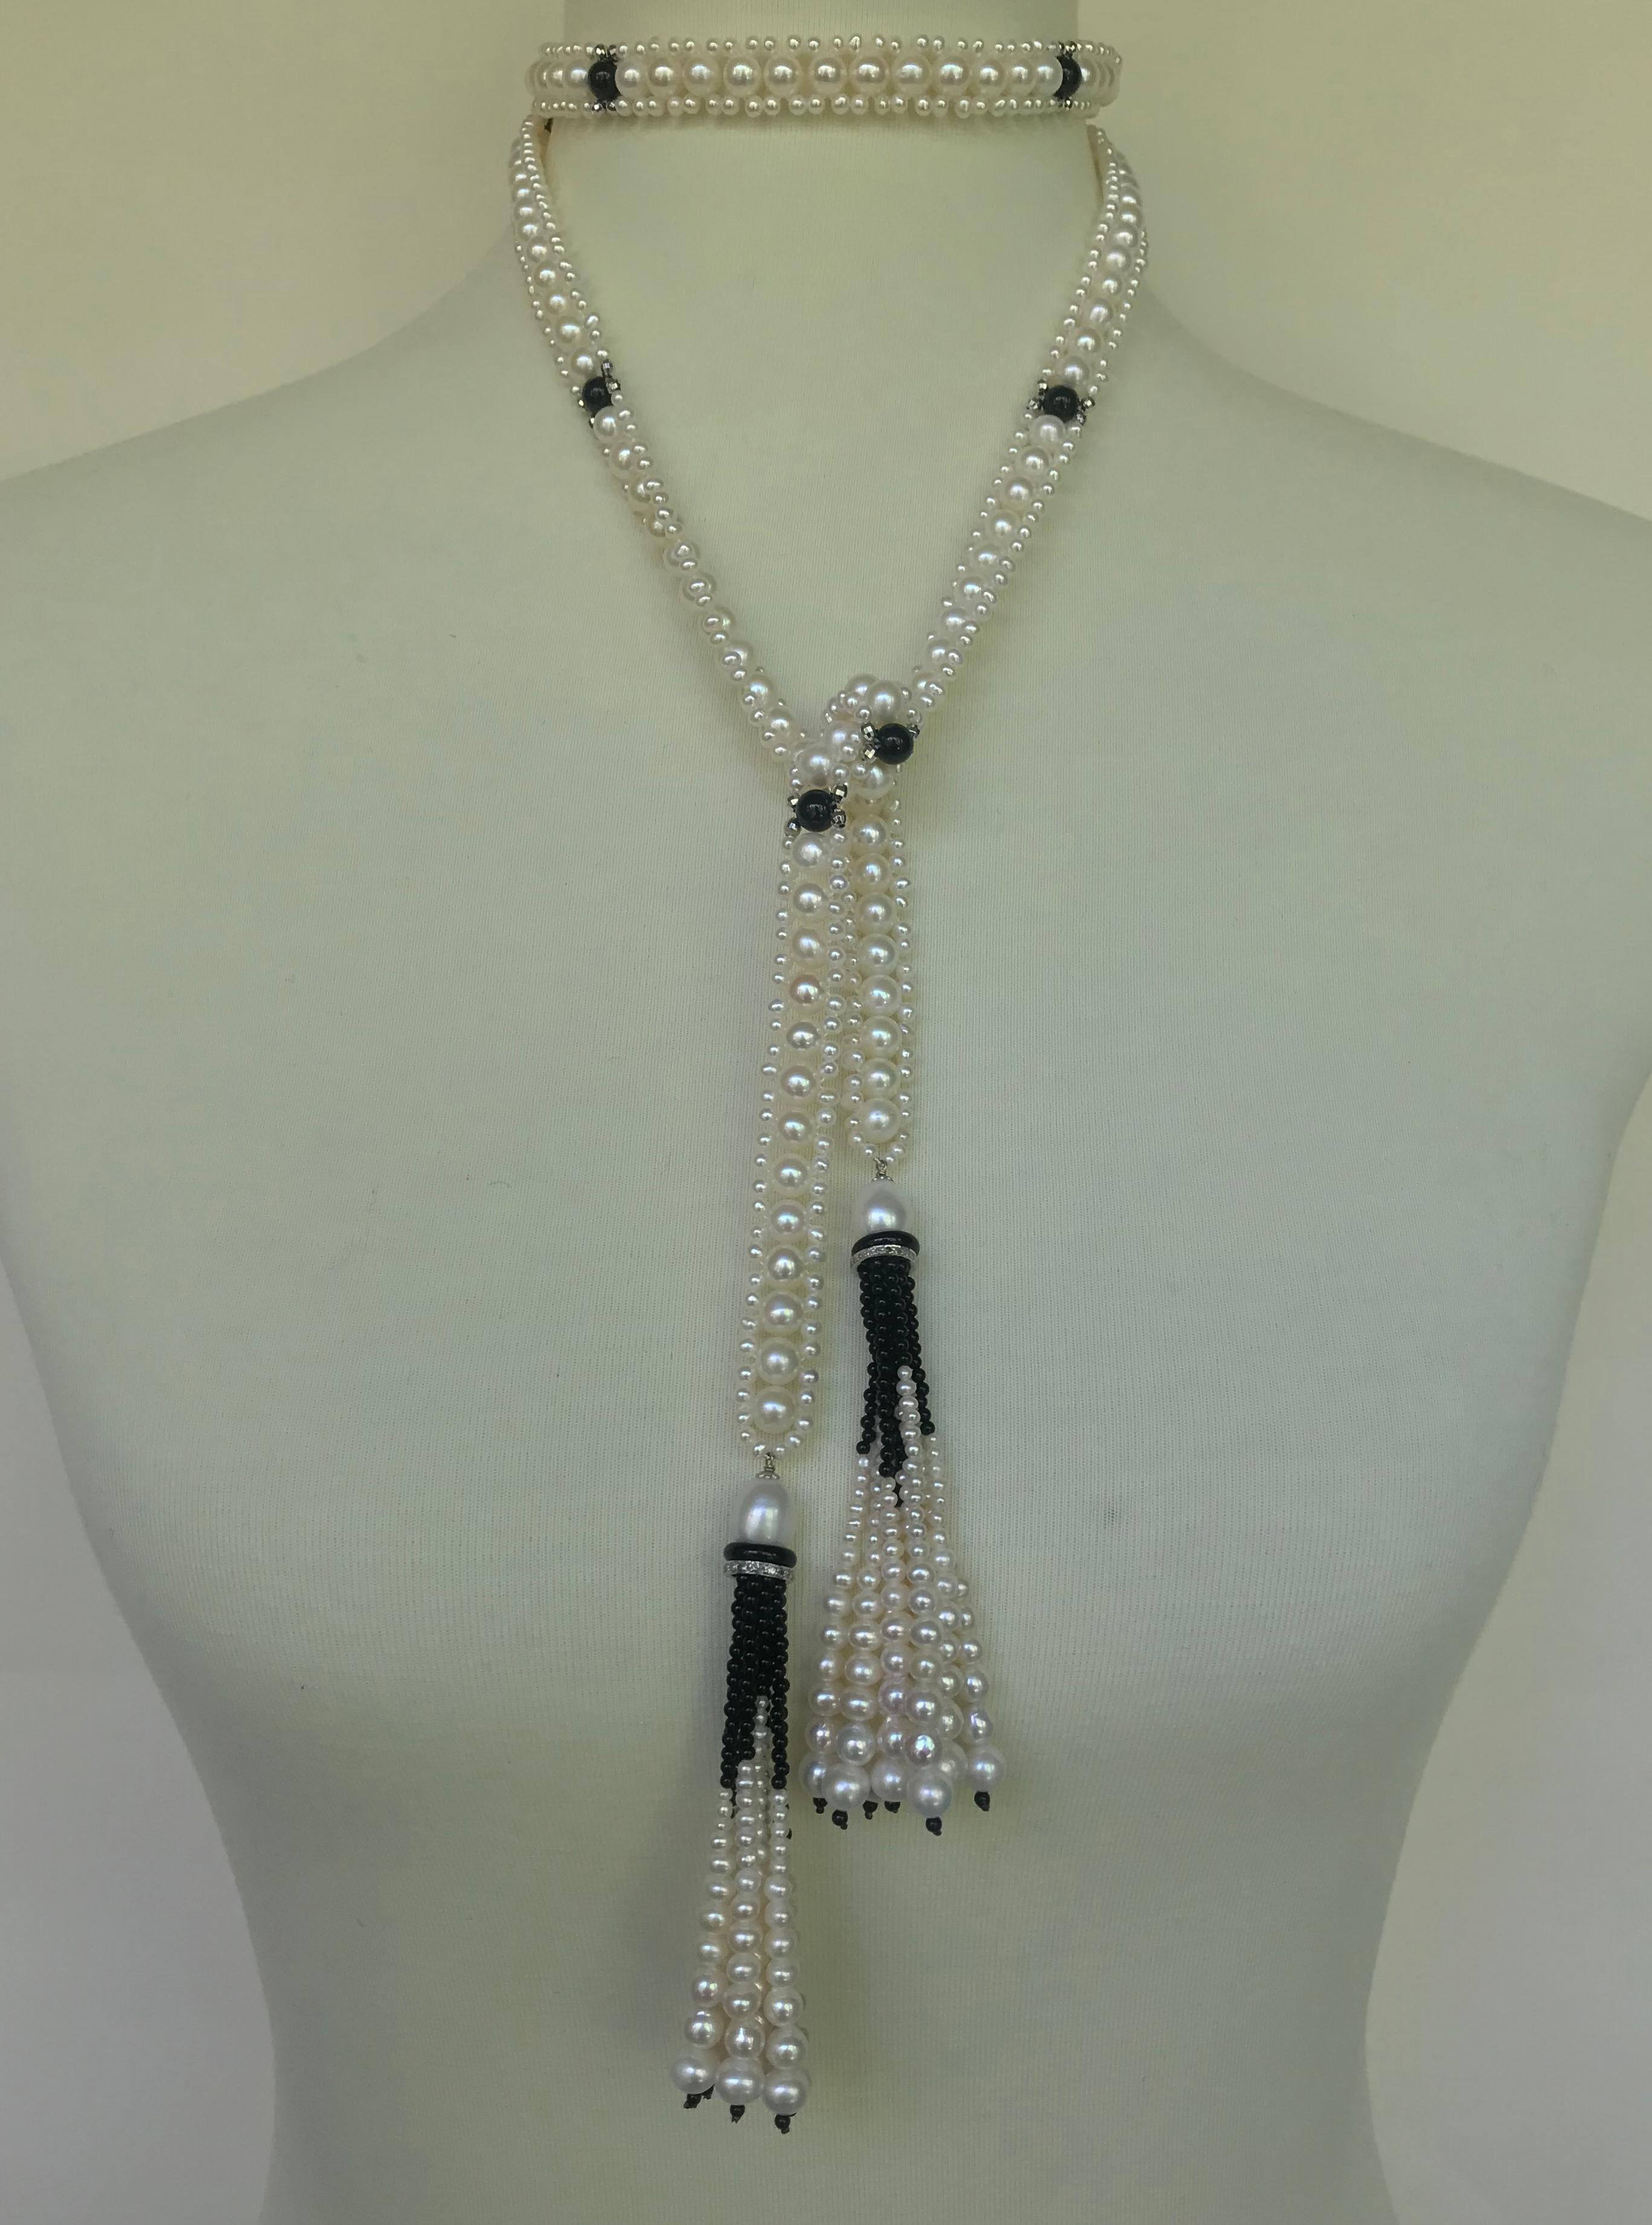 Bead Marina J Woven Pearl Sautoir with Tassels and 14 K White Gold and Onyx beads